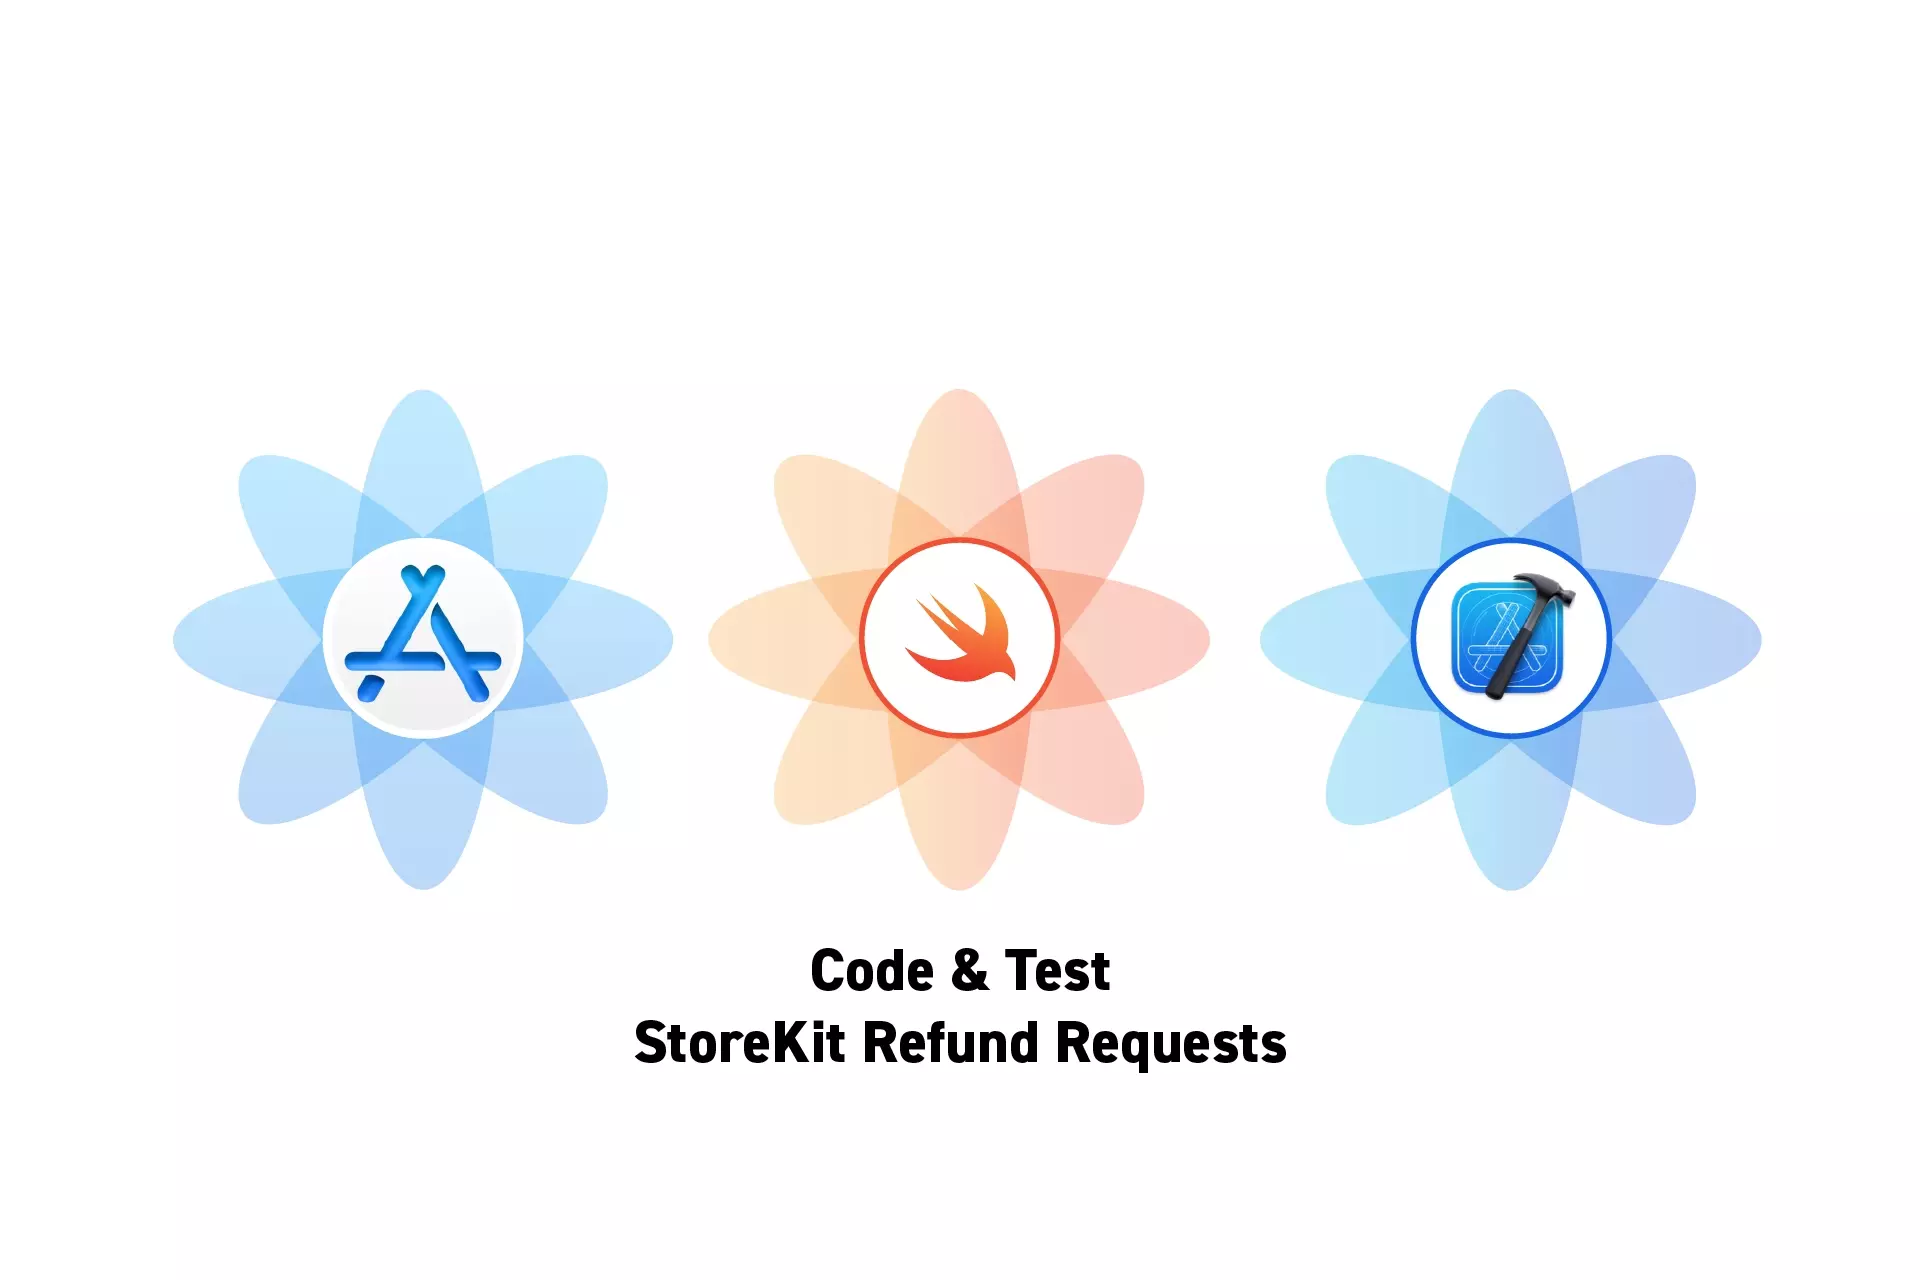 Three flowers that represent StoreKit, Swift and XCode side by side. Beneath them sits the text “Code & Test StoreKit Refund Requests.”